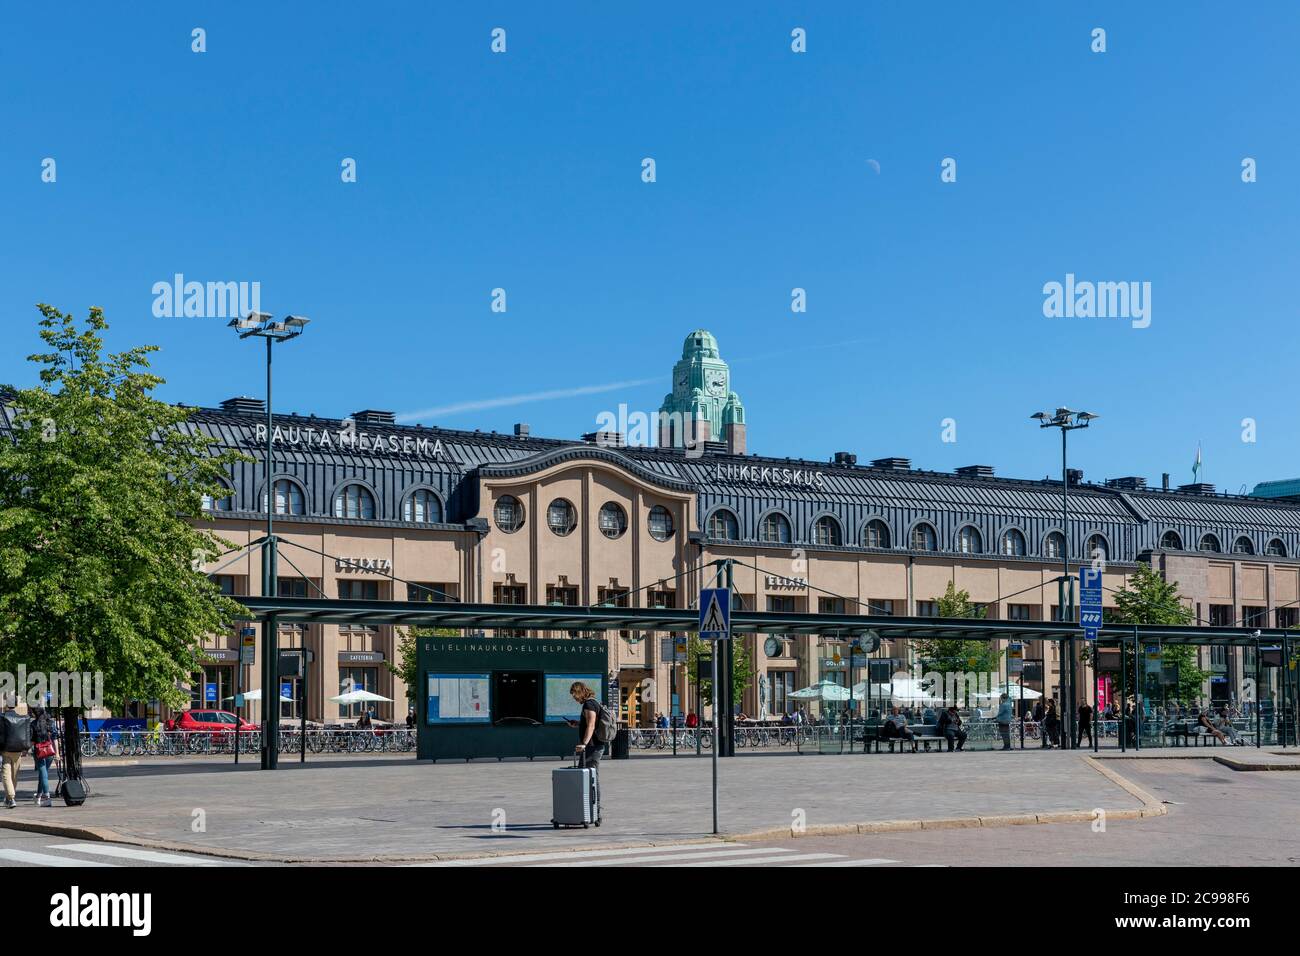 Helsinki main railway station is a hub for public transportation. It provides transportation by train, tram, bus or subway. Stock Photo